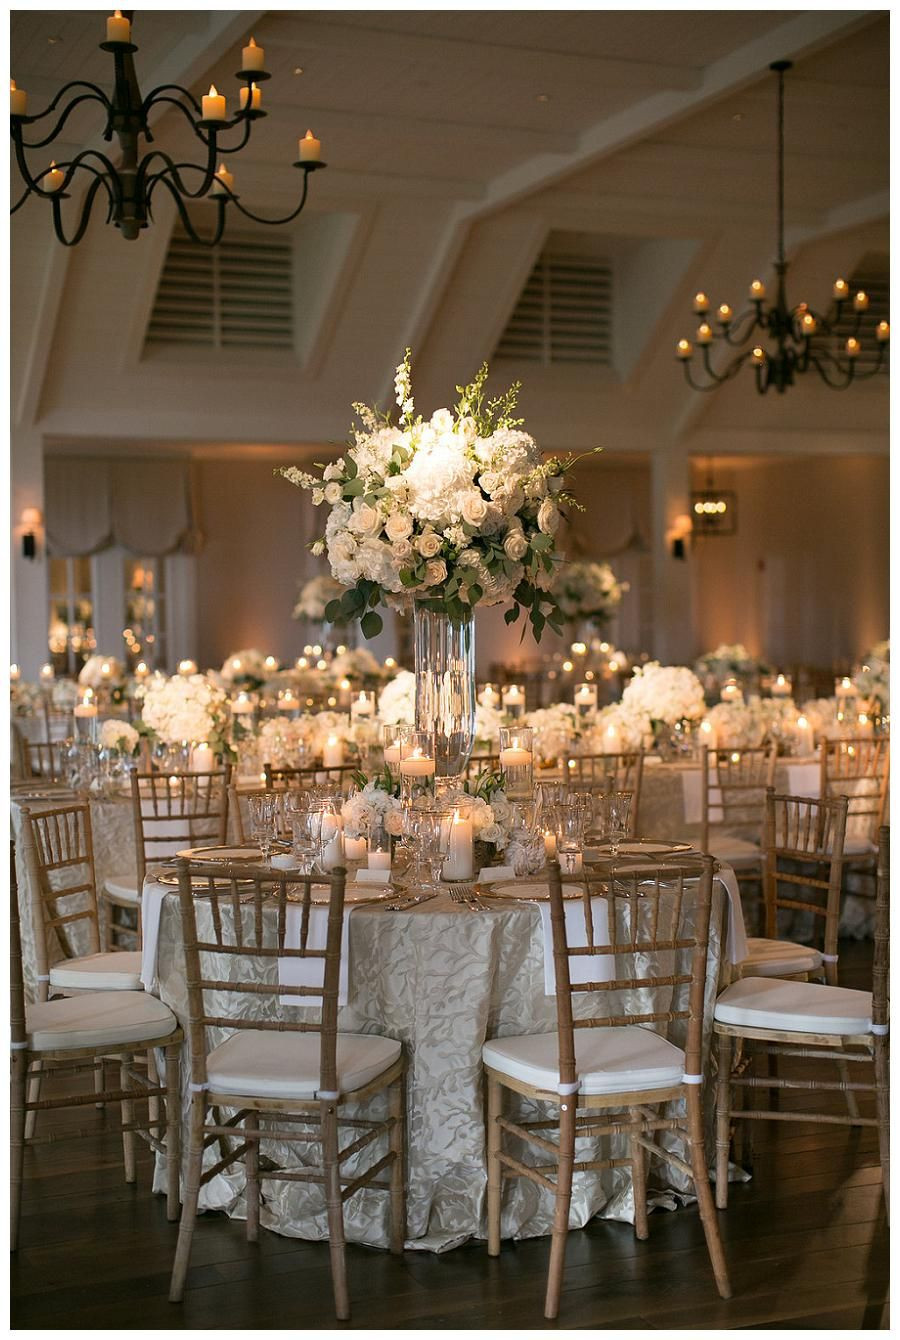 Table Decorations For Wedding Reception
 Gold ivory and white wedding reception decor with white